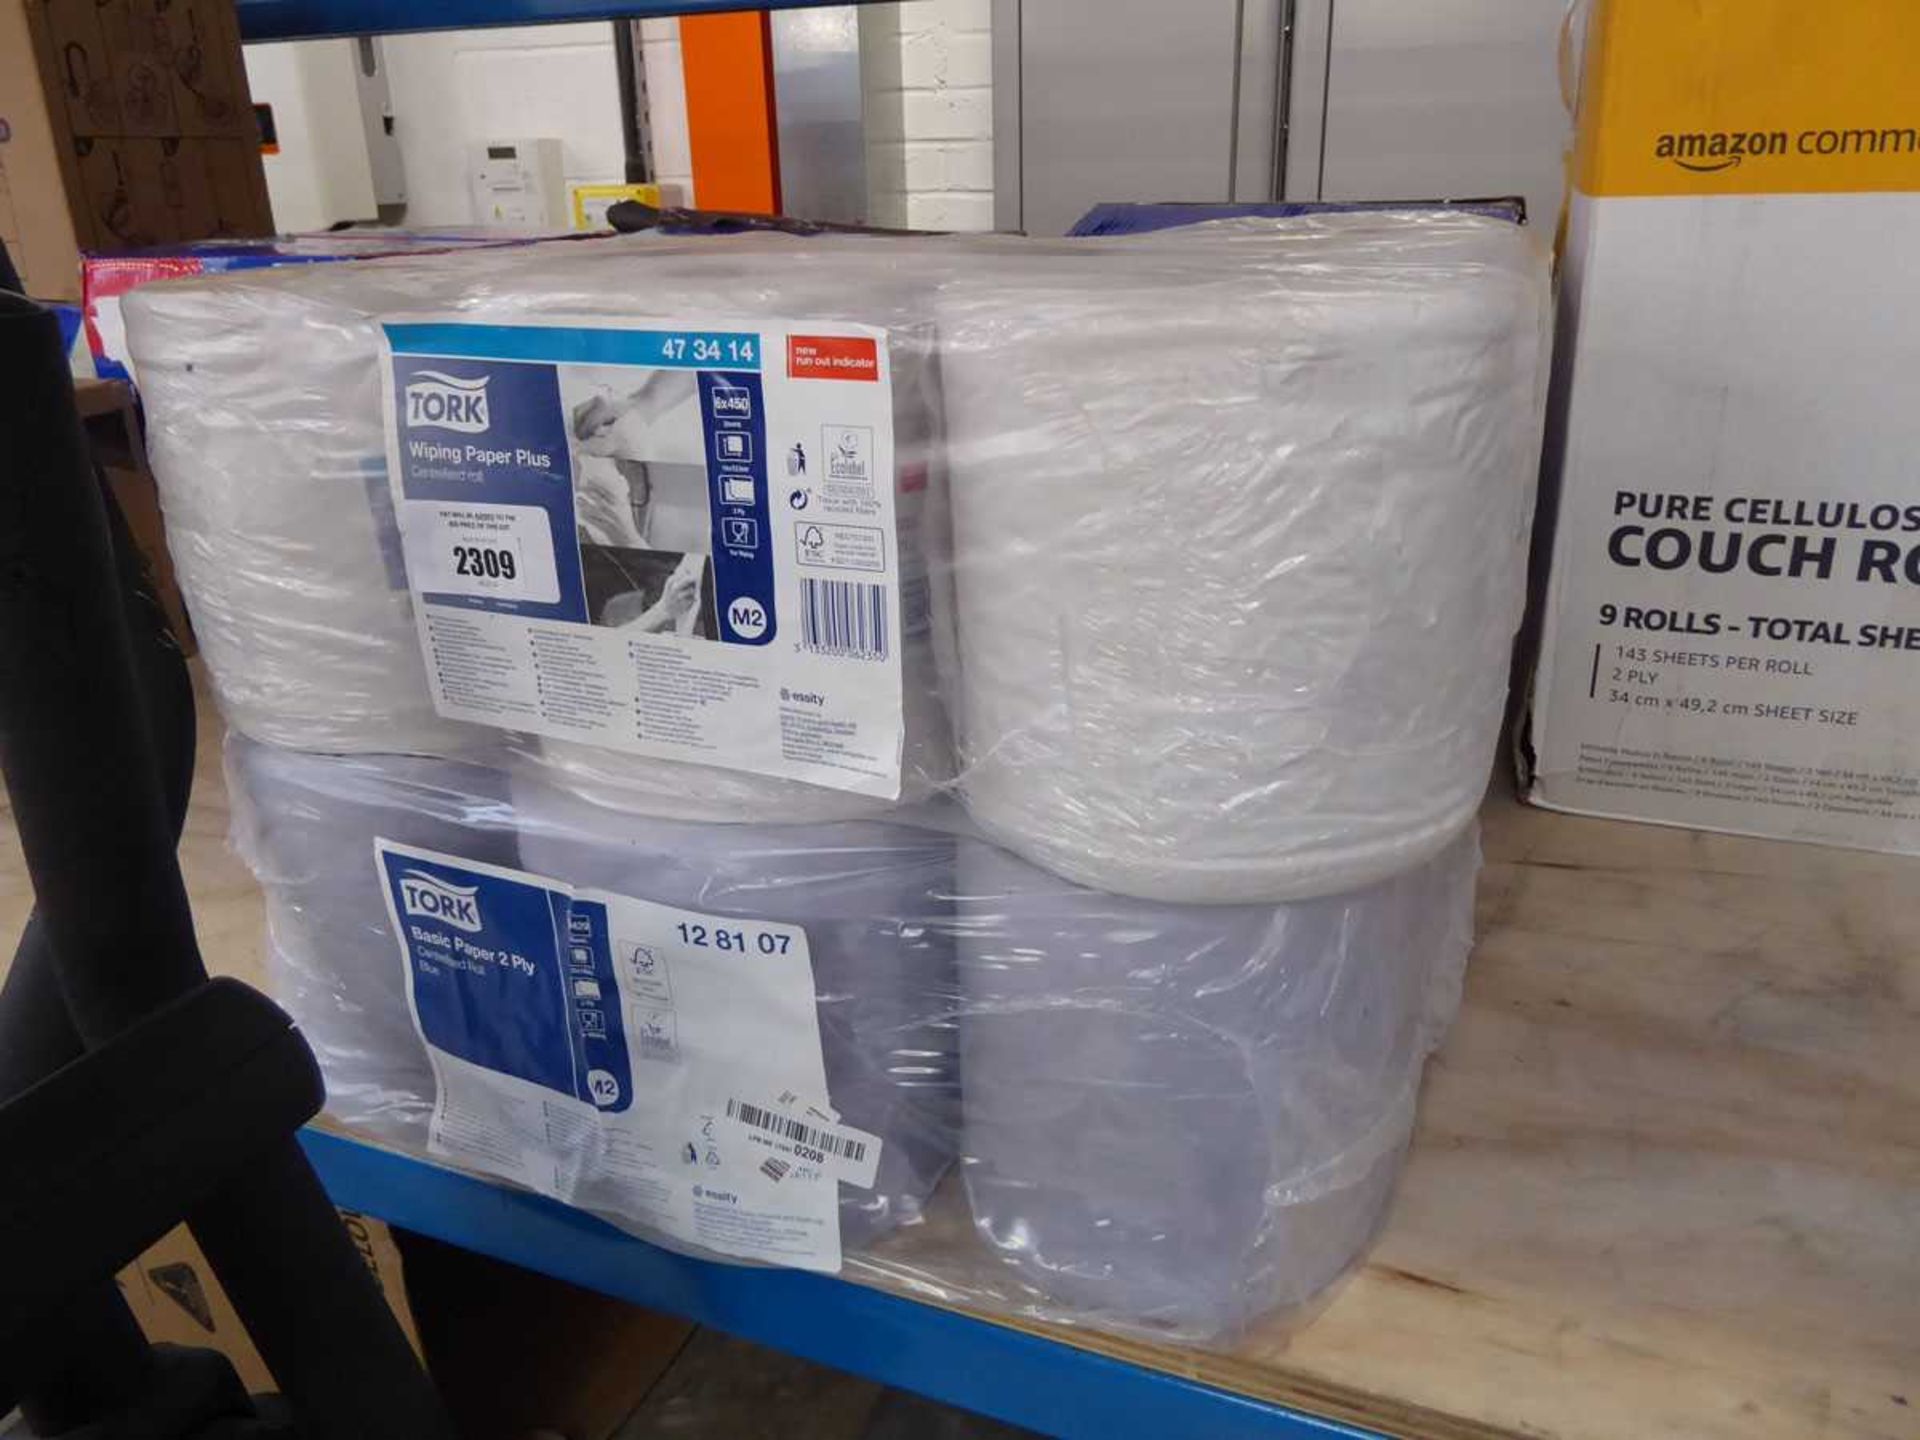 +VAT 2 packs containing 12 rolls total of Tork wiping paper